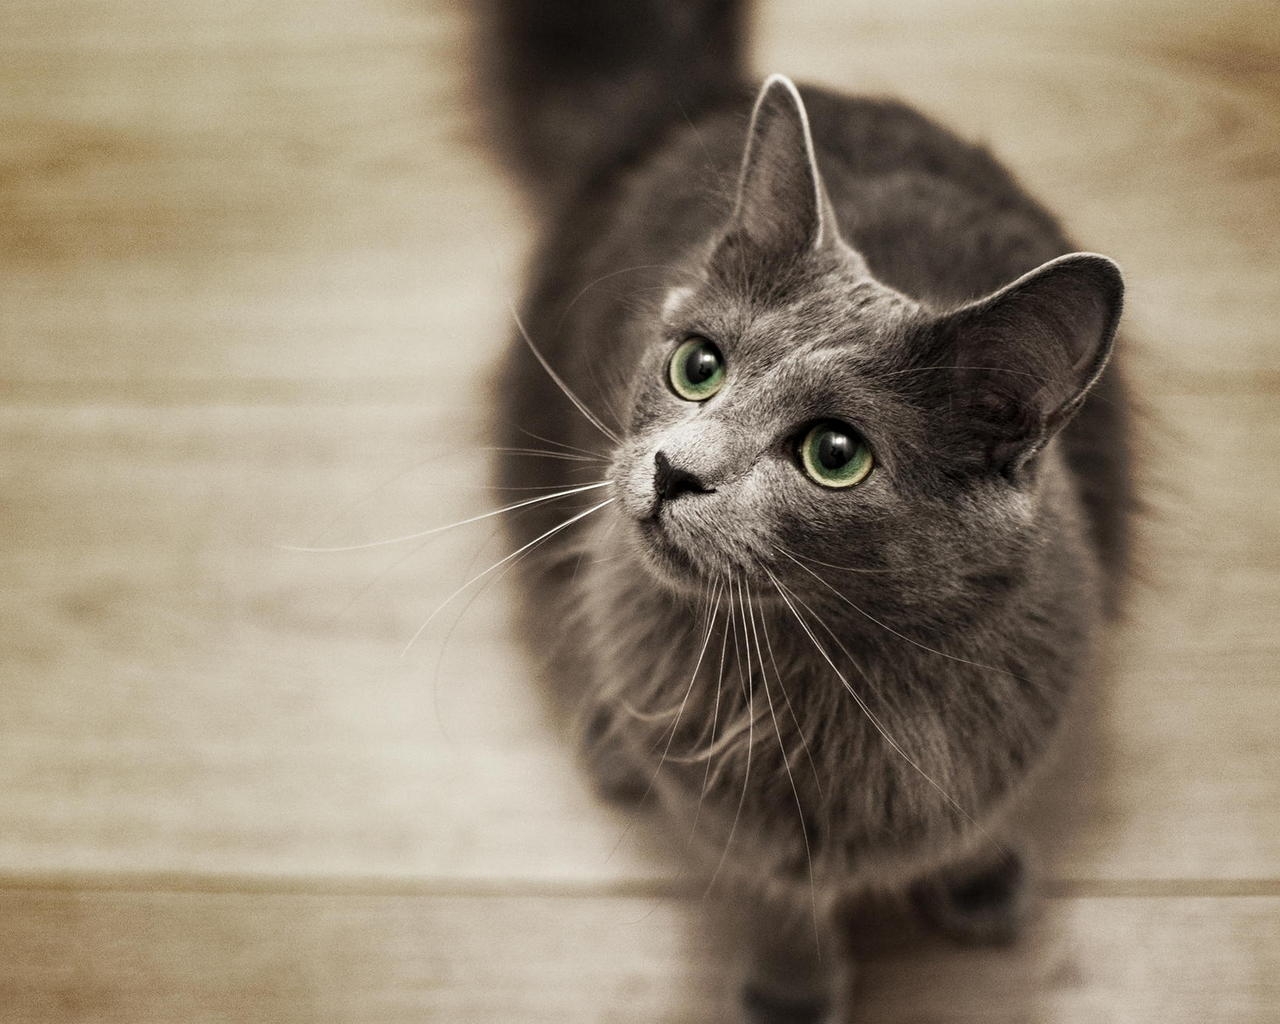 Nebelung Cat on the Floor for 1280 x 1024 resolution